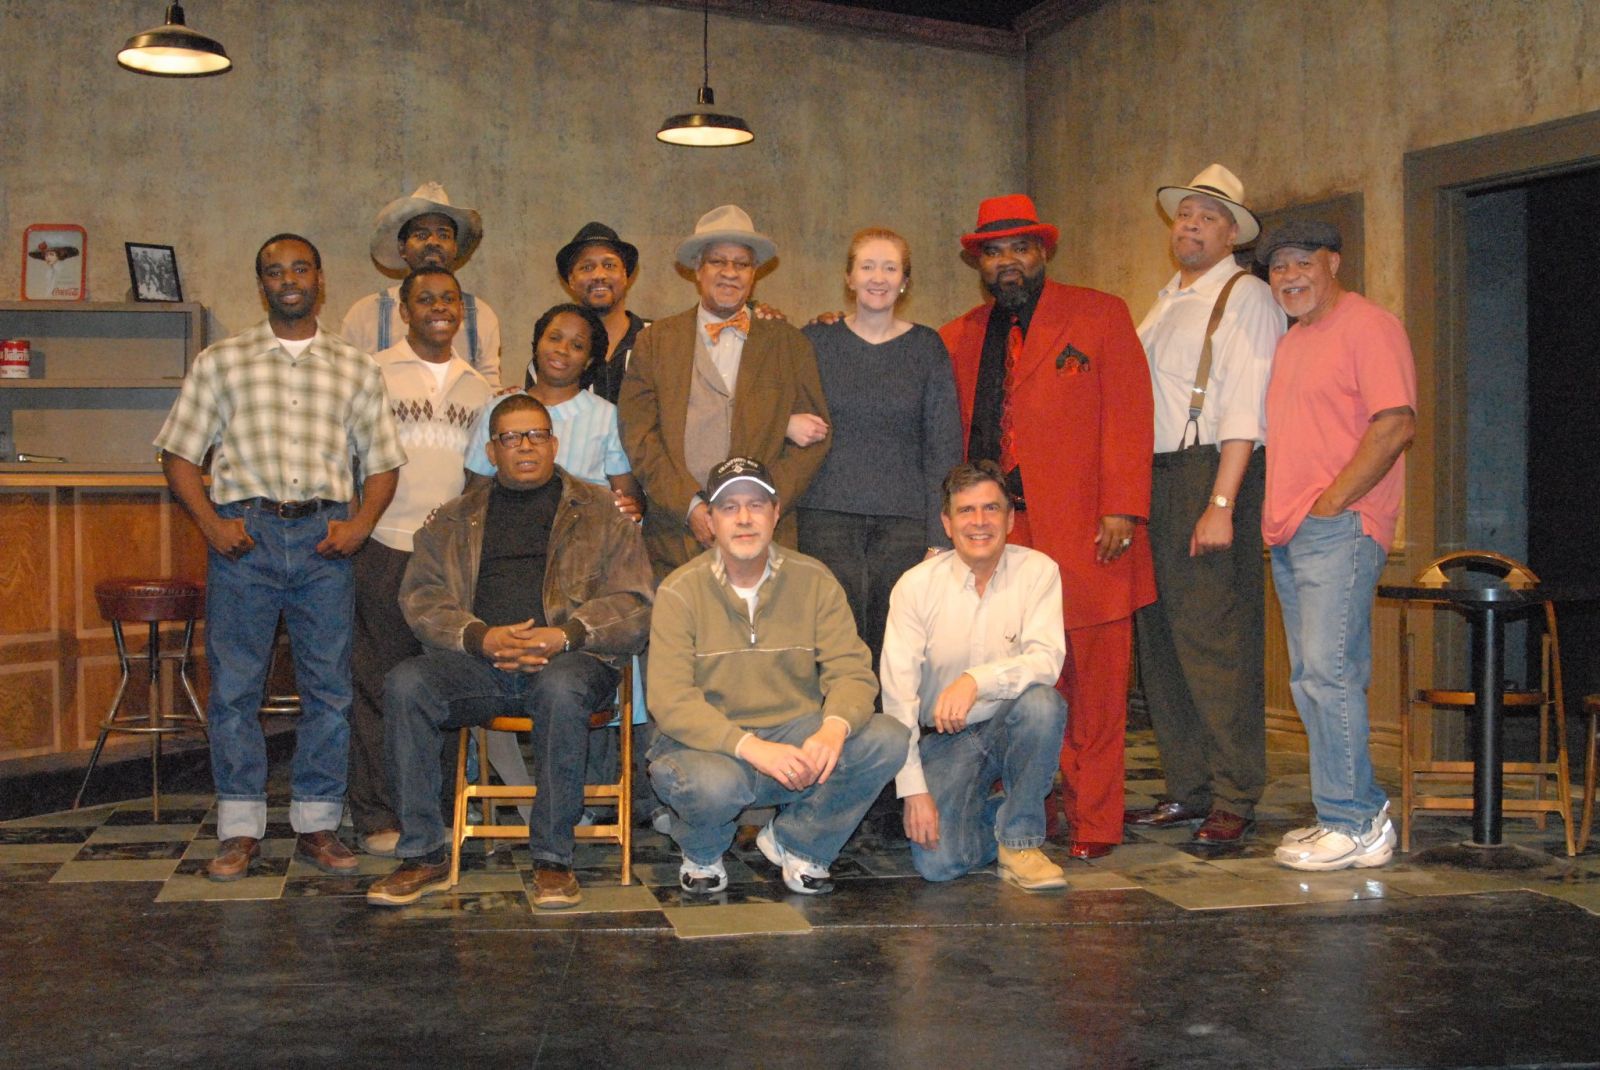 John Beasley with a team at John Beasley Theater and Workshop